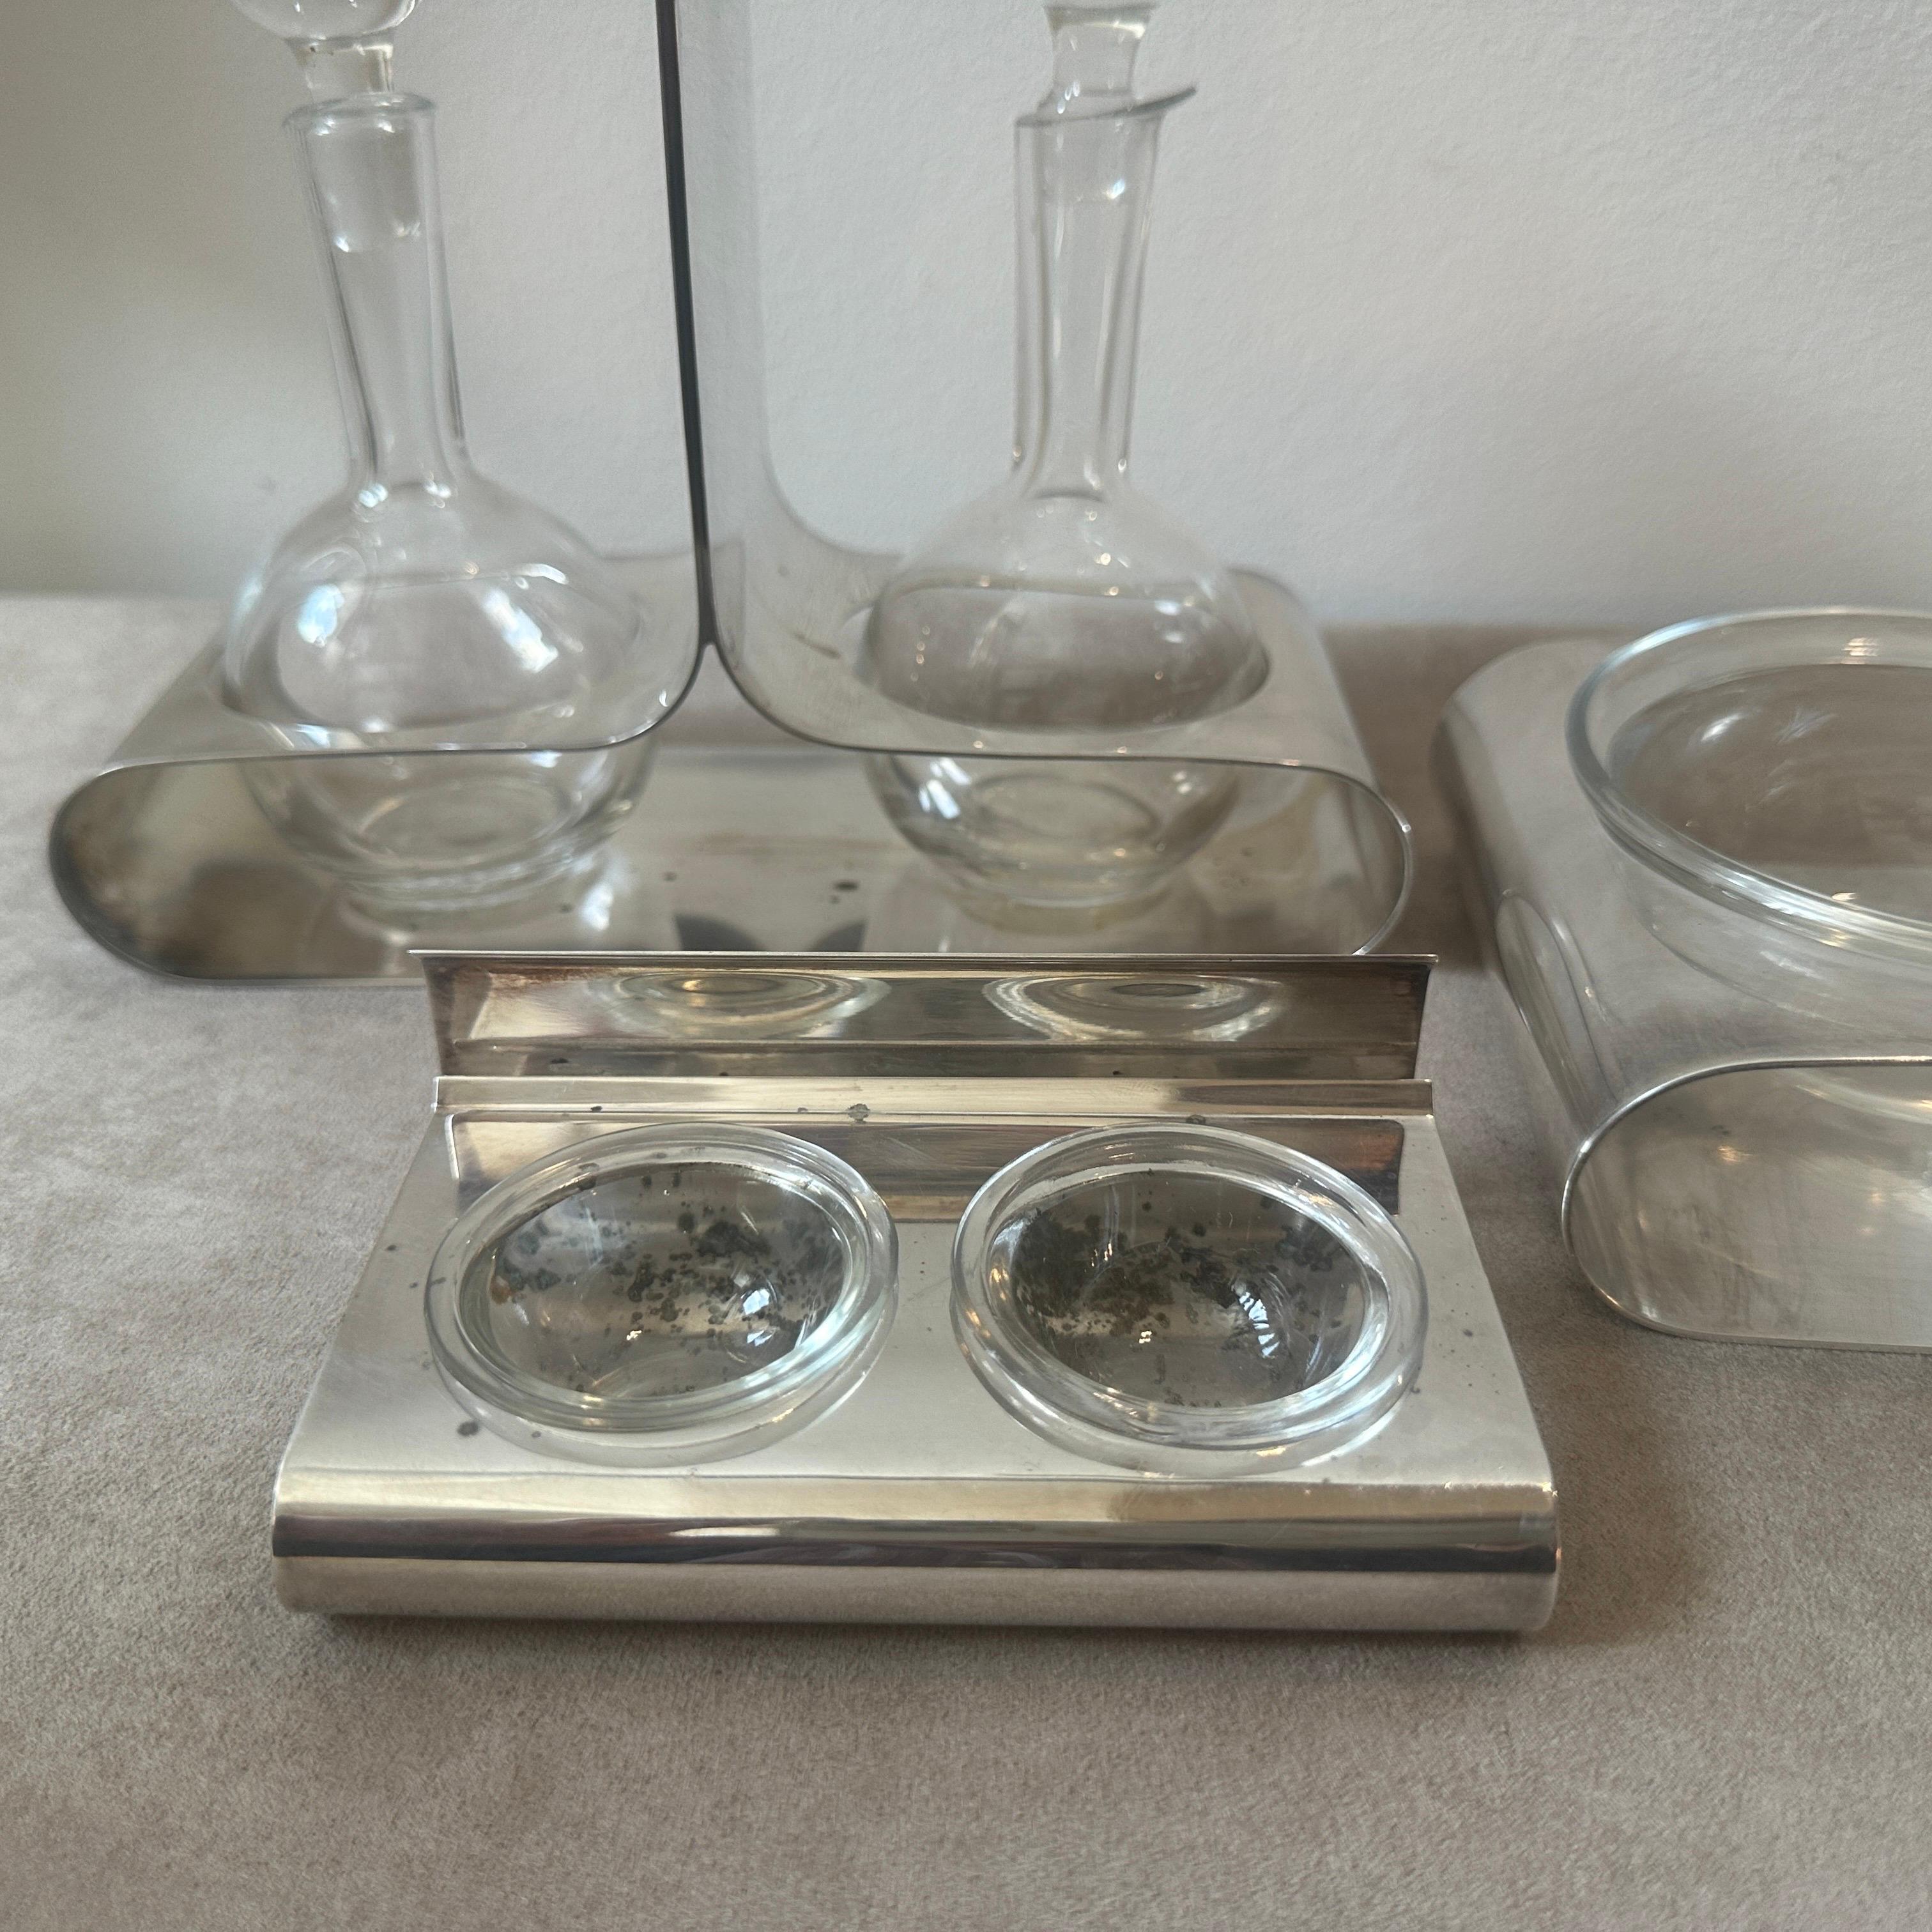 Three 1980s Modernist Silver Plated and Glass Serving Pieces by Lino Sabattini For Sale 1